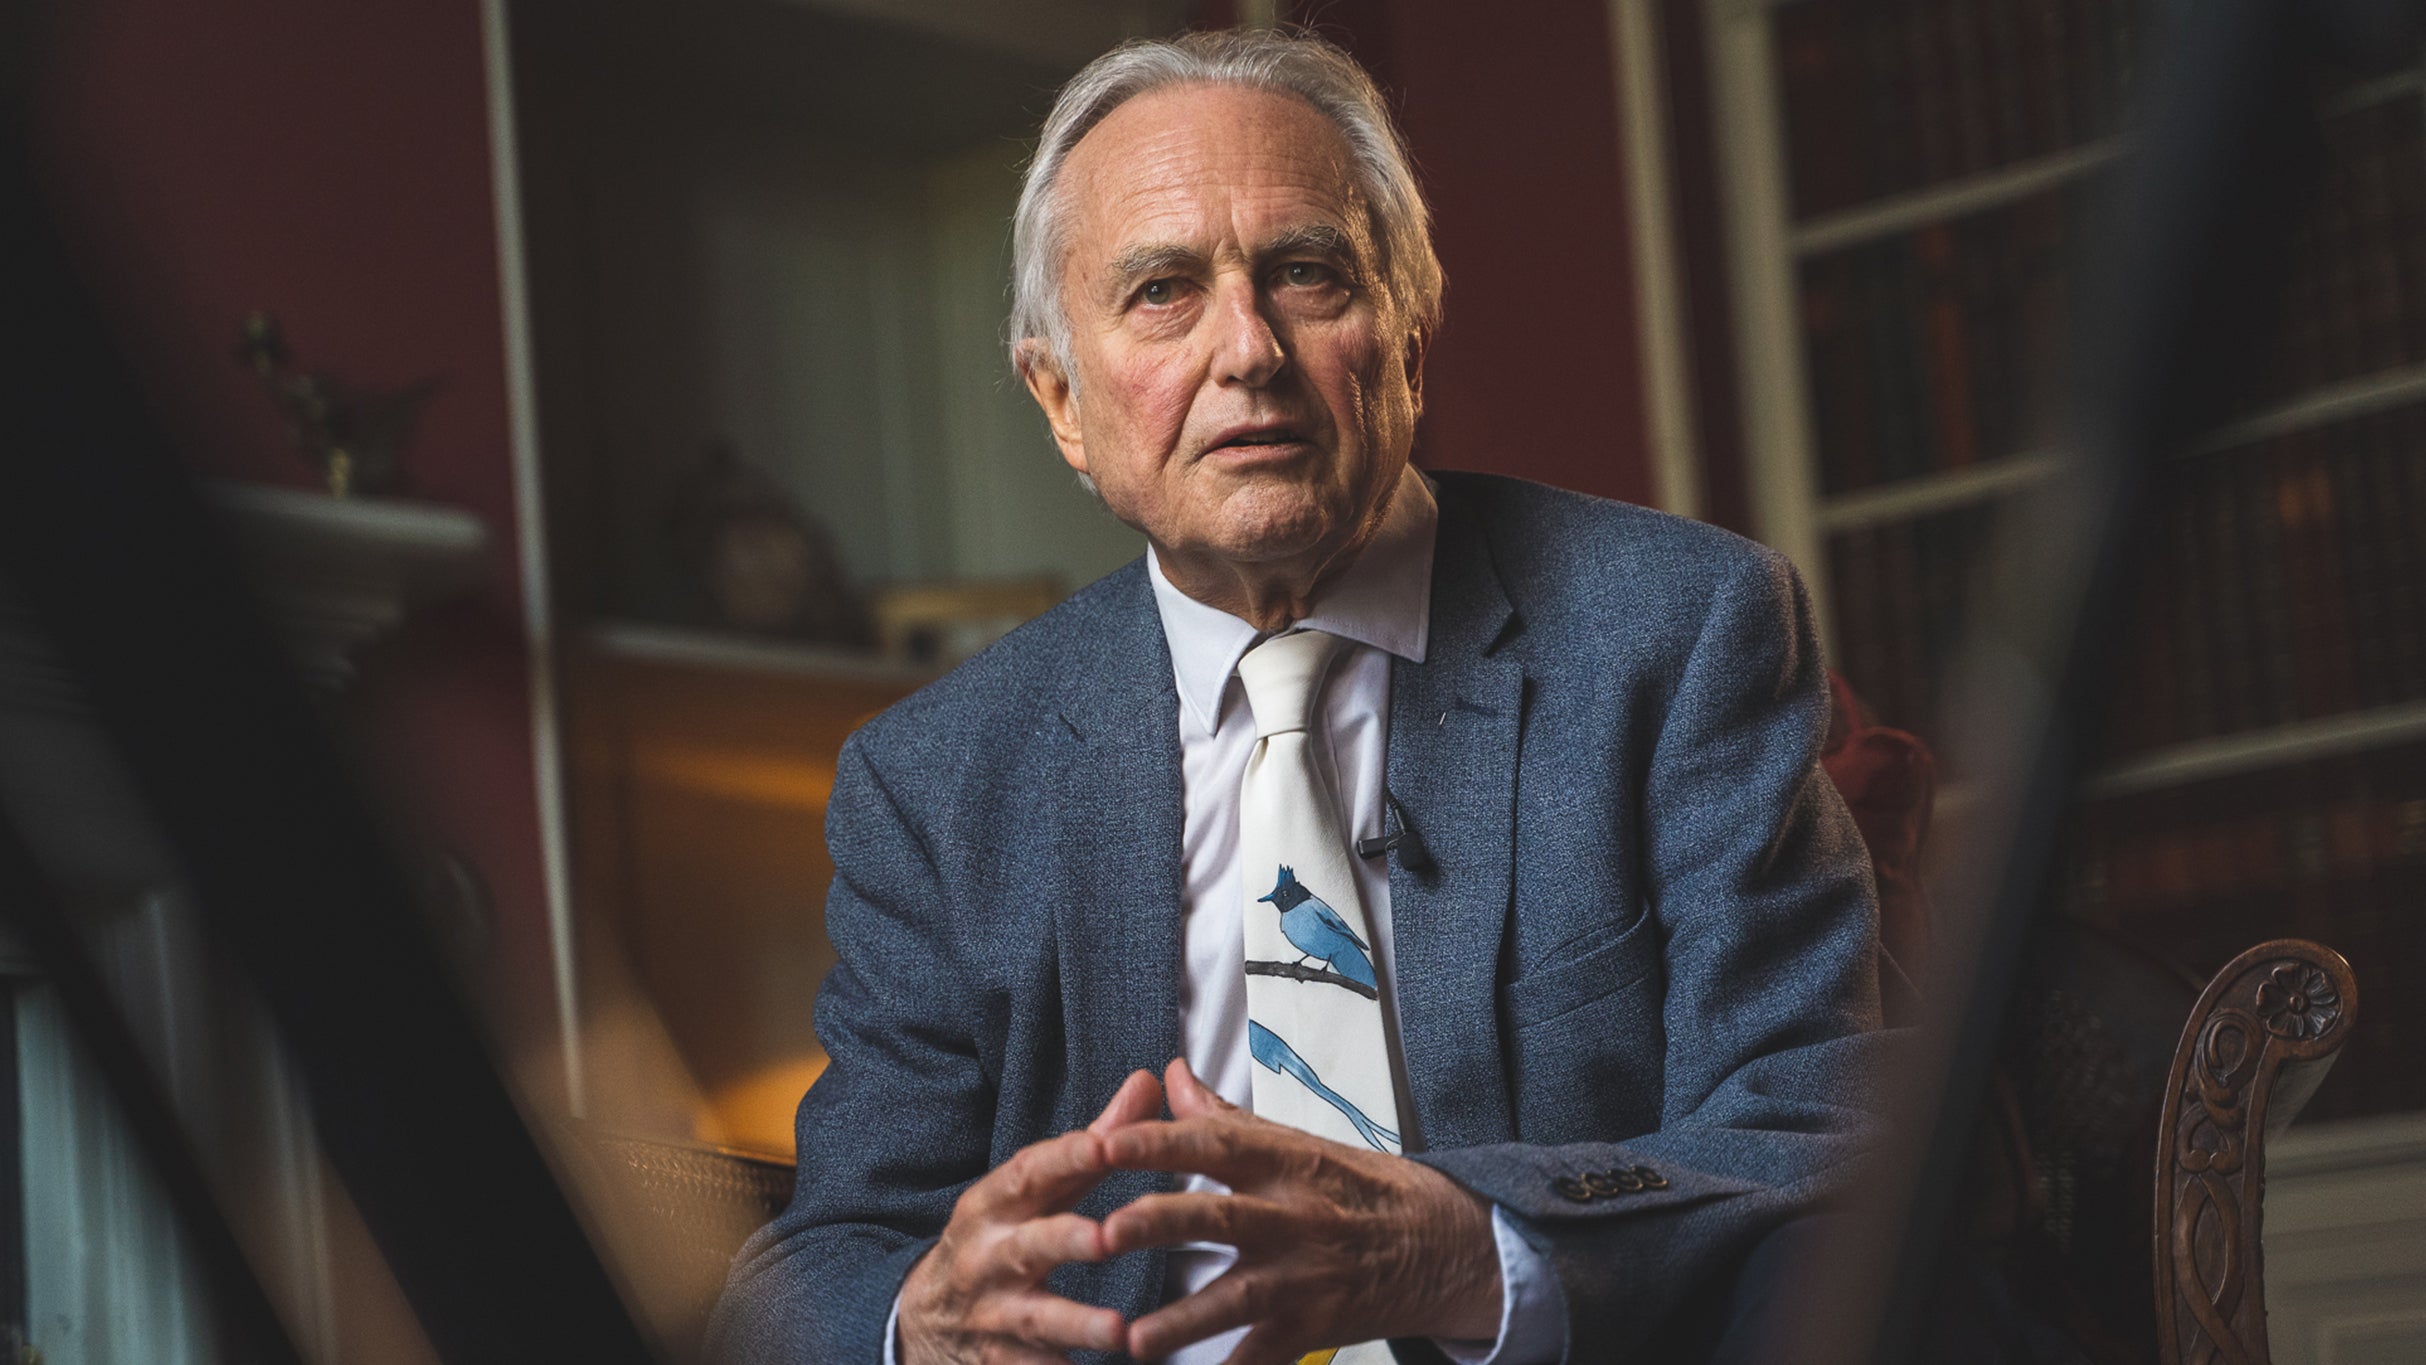 An Evening with Richard Dawkins and Friends  presale code for advance tickets in San Francisco